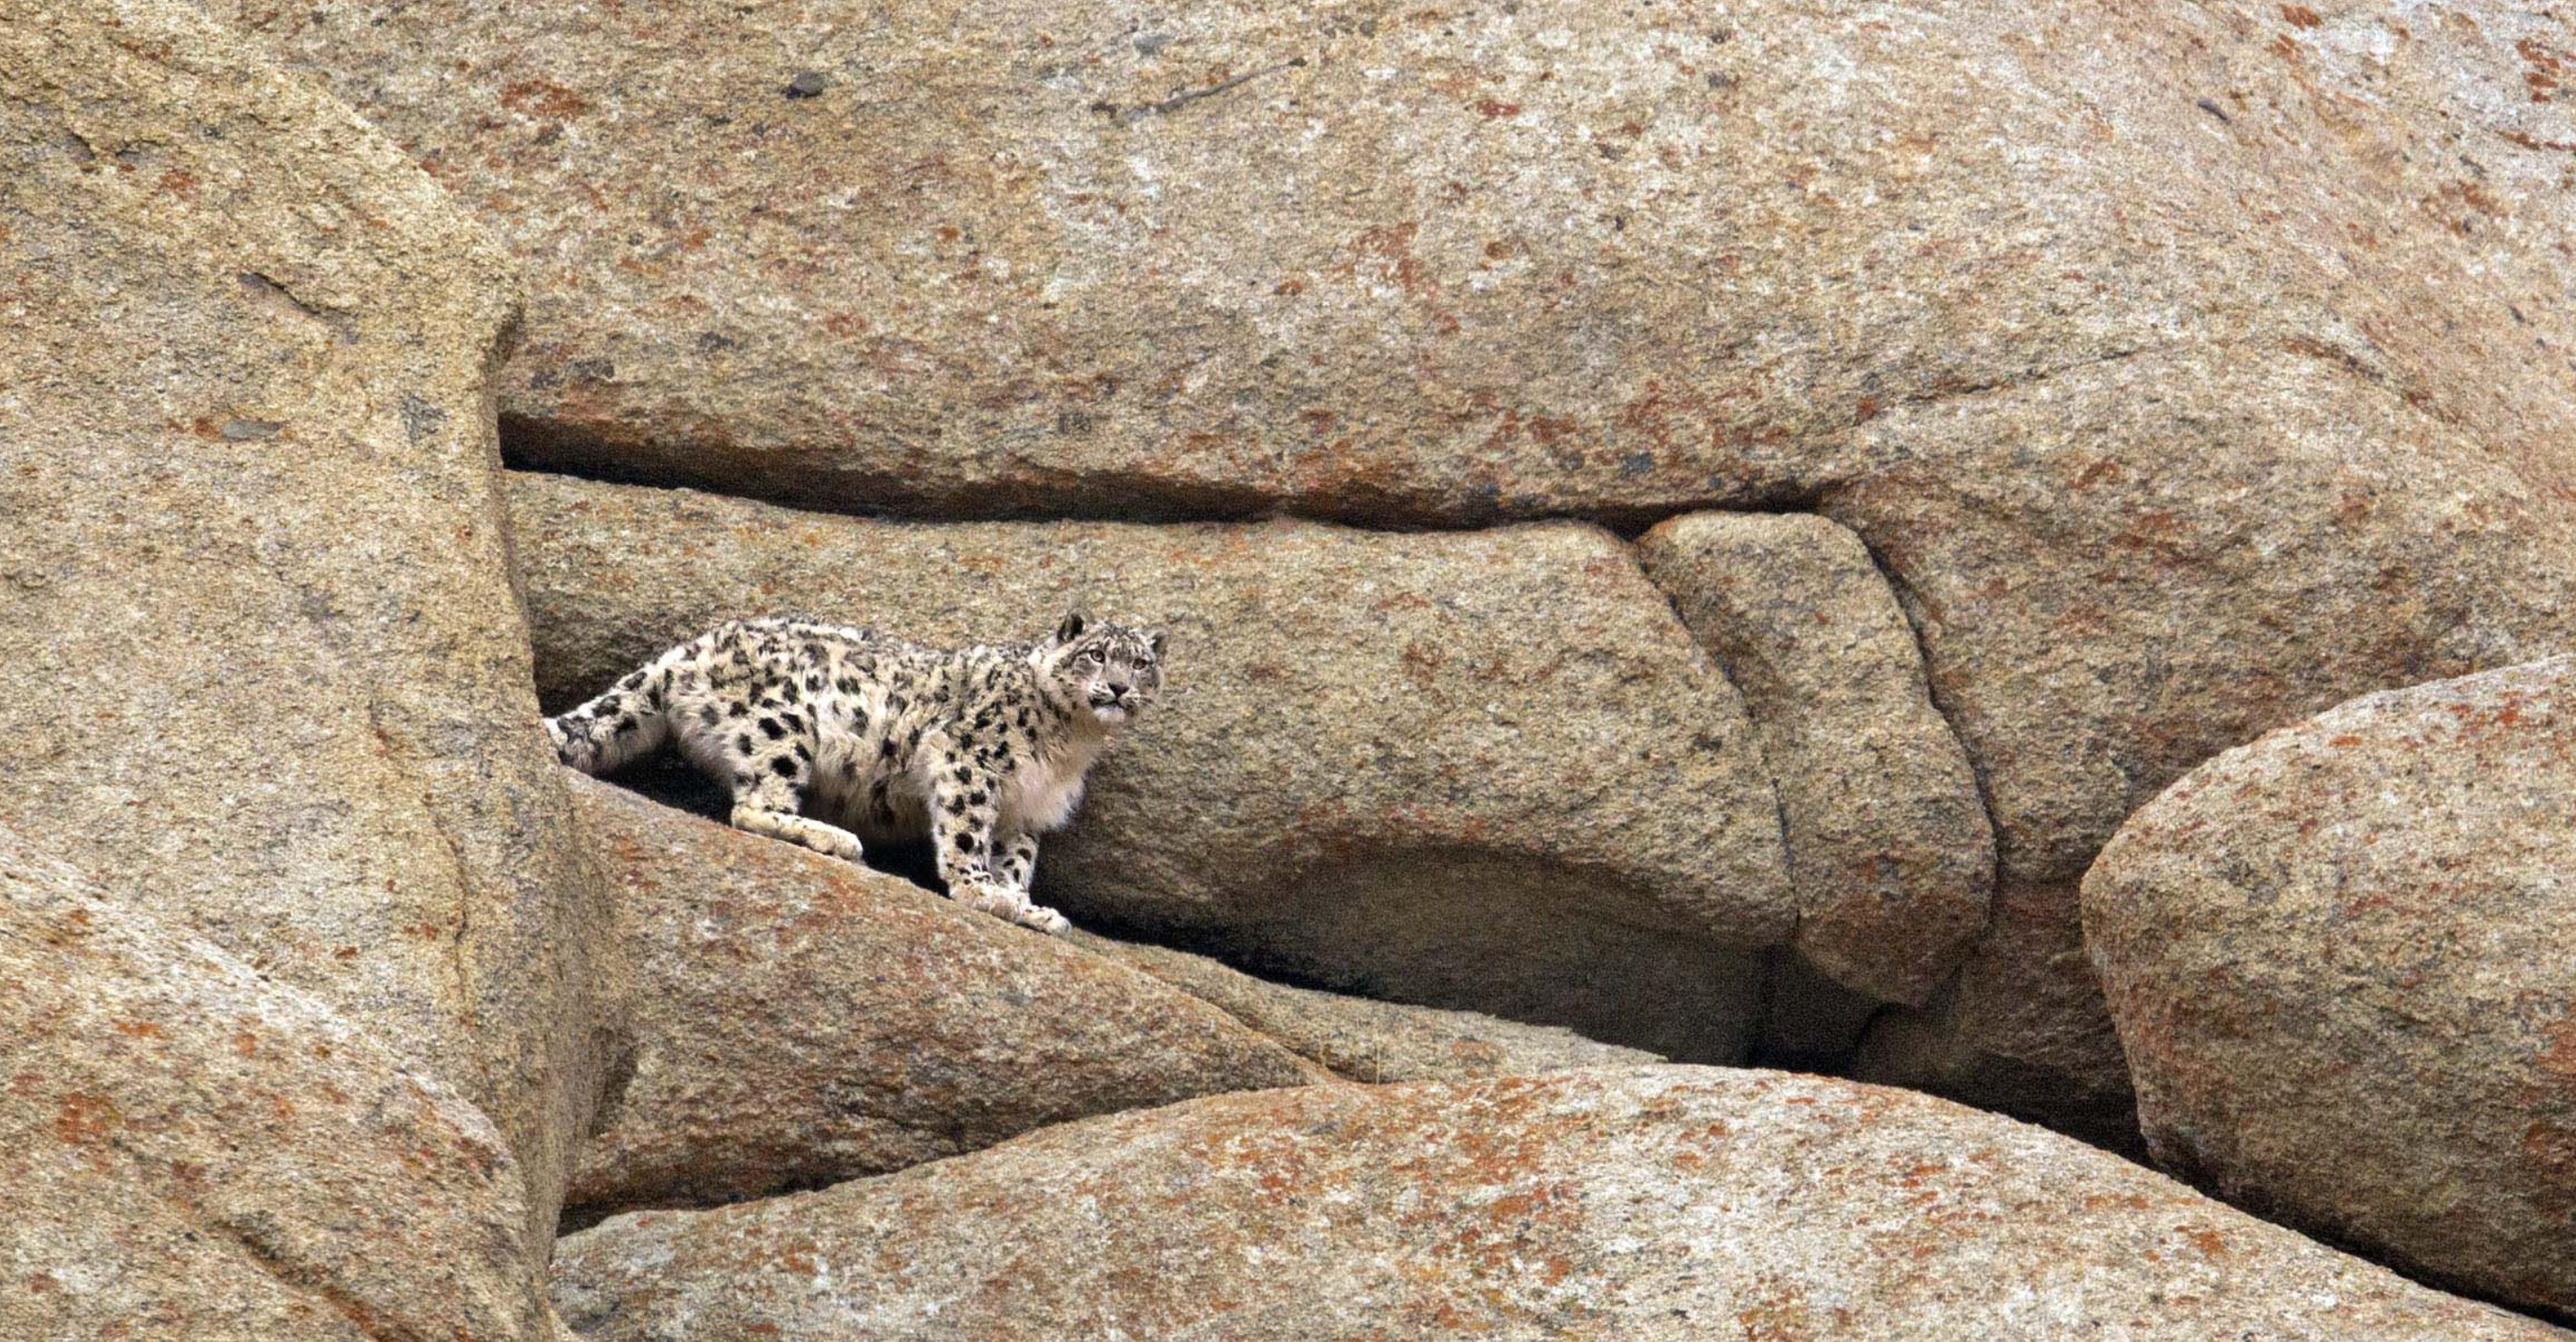 A snow leopard surveys its territory from a rocky ledge in Ladakh, India